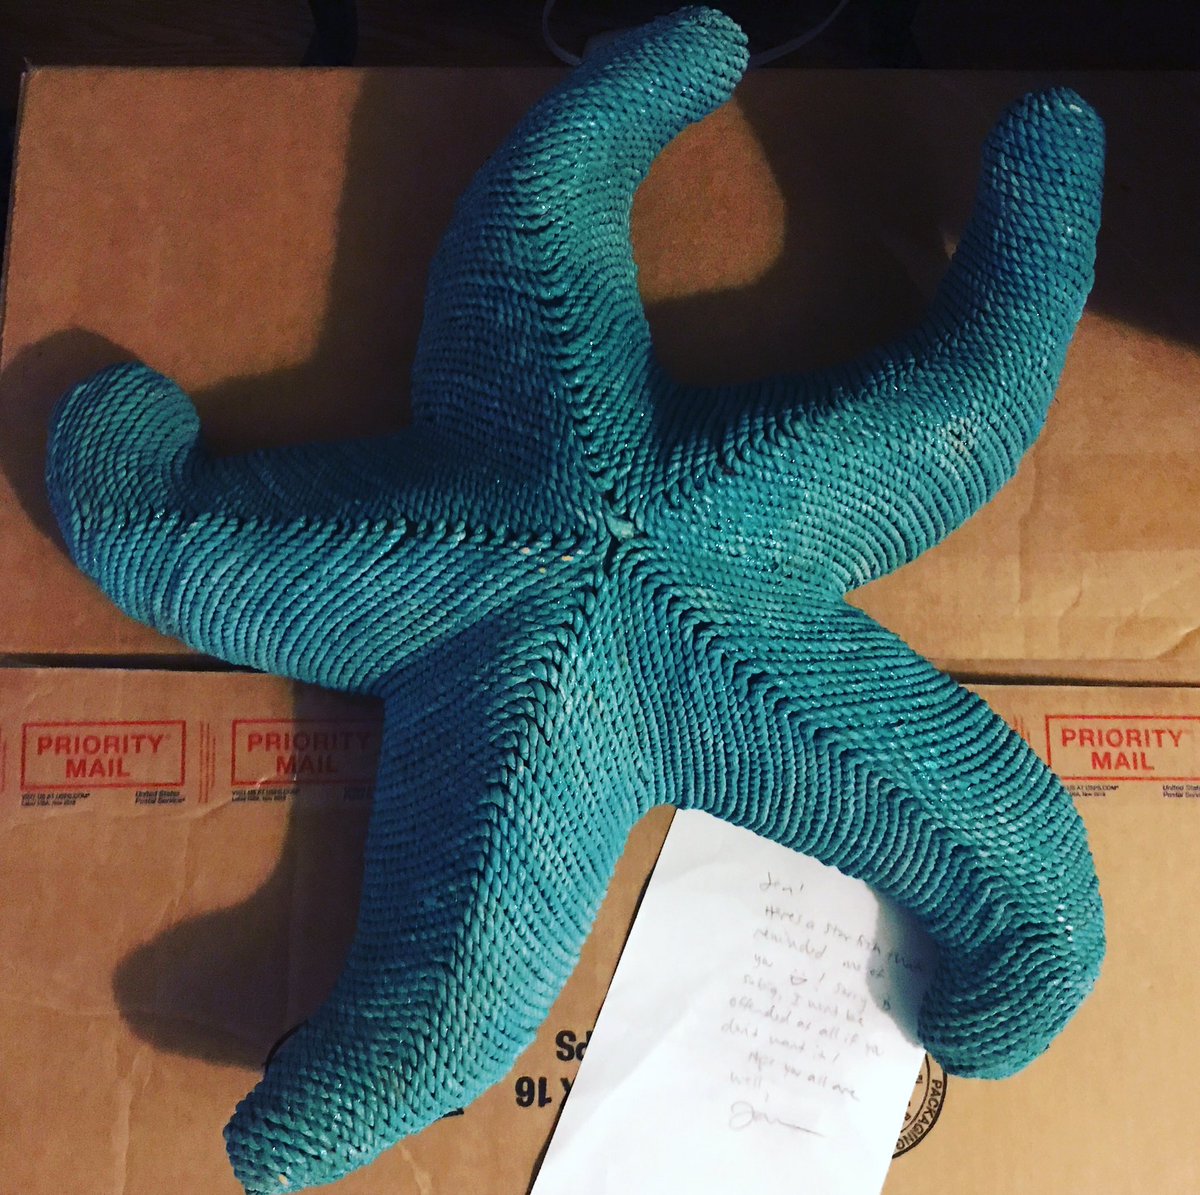 So excited to receive this from @JanineSDavis today! Can’t wait to get back on campus and hang it in my office. #throwstarfish #starfishthrower #madeadifferencetothatone